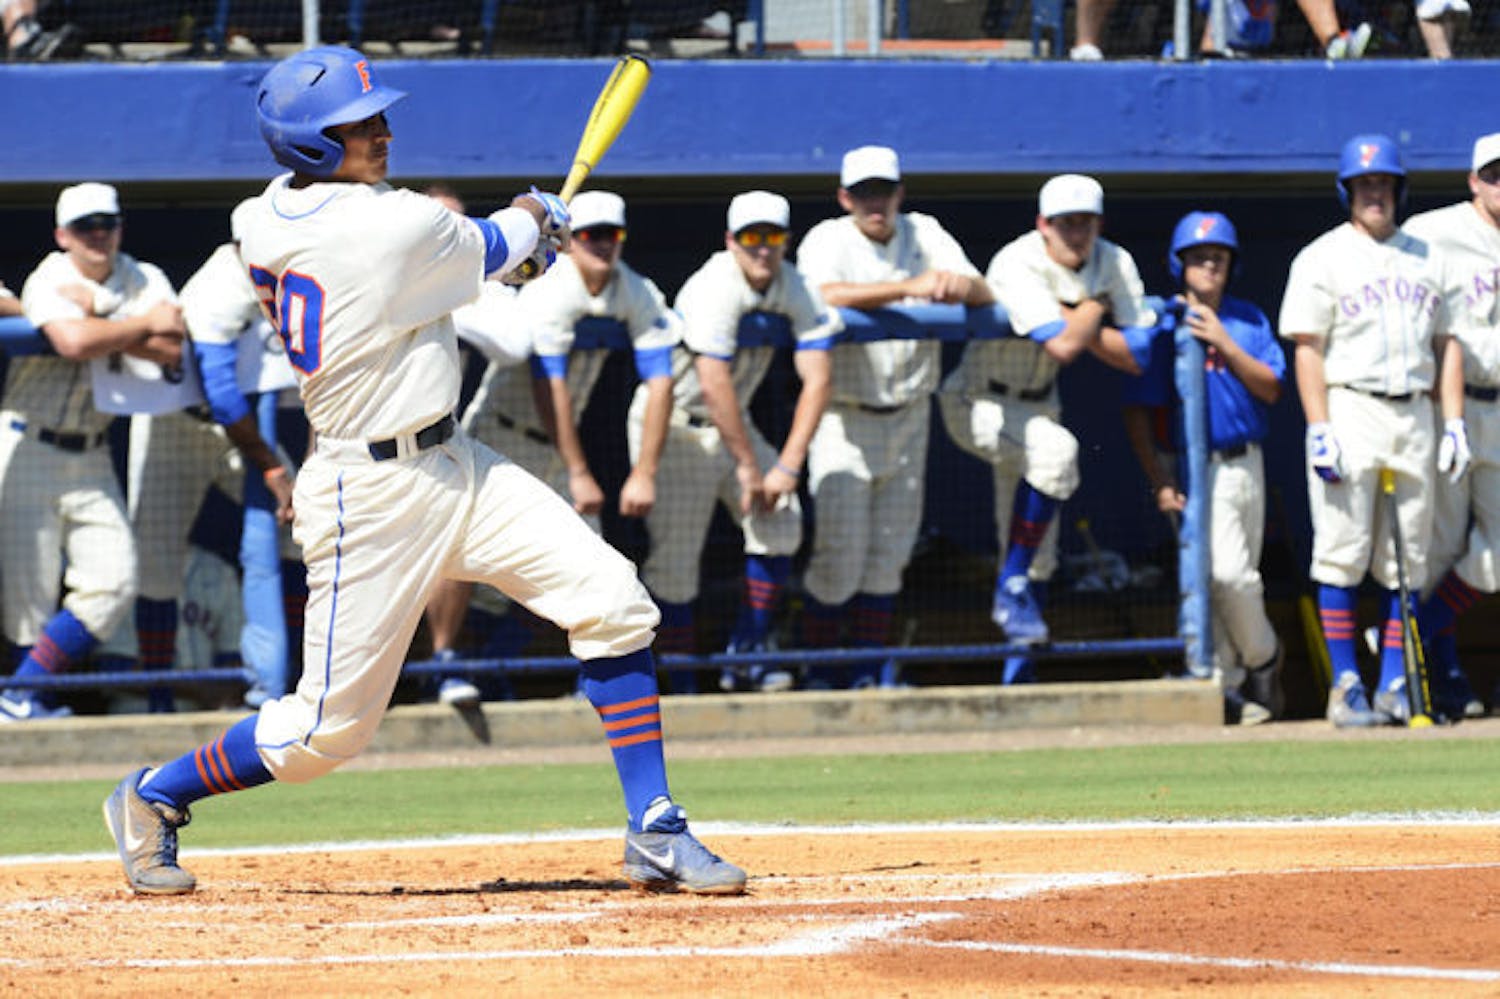 Senior Vickash Ramjit hits the ball during Florida’s 14-5 win against South Carolina on Saturday at McKethan Stadium. Ramjit scored three times in the victory, which completed the Gators’ first sweep against the Gamecocks since April 2009.